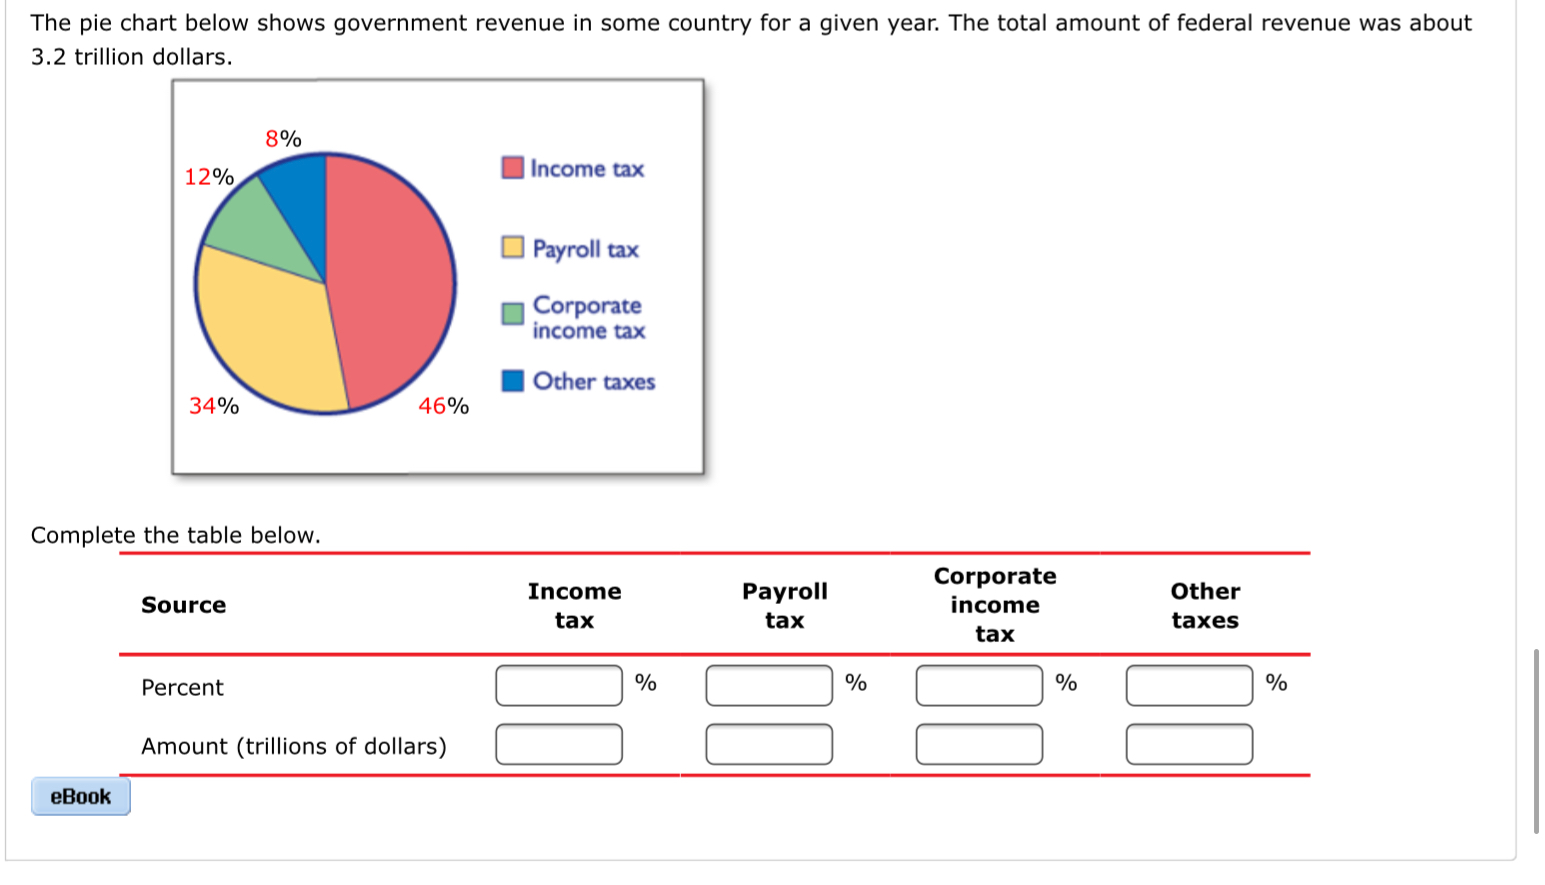 Federal Government Tax Revenue Pie Chart